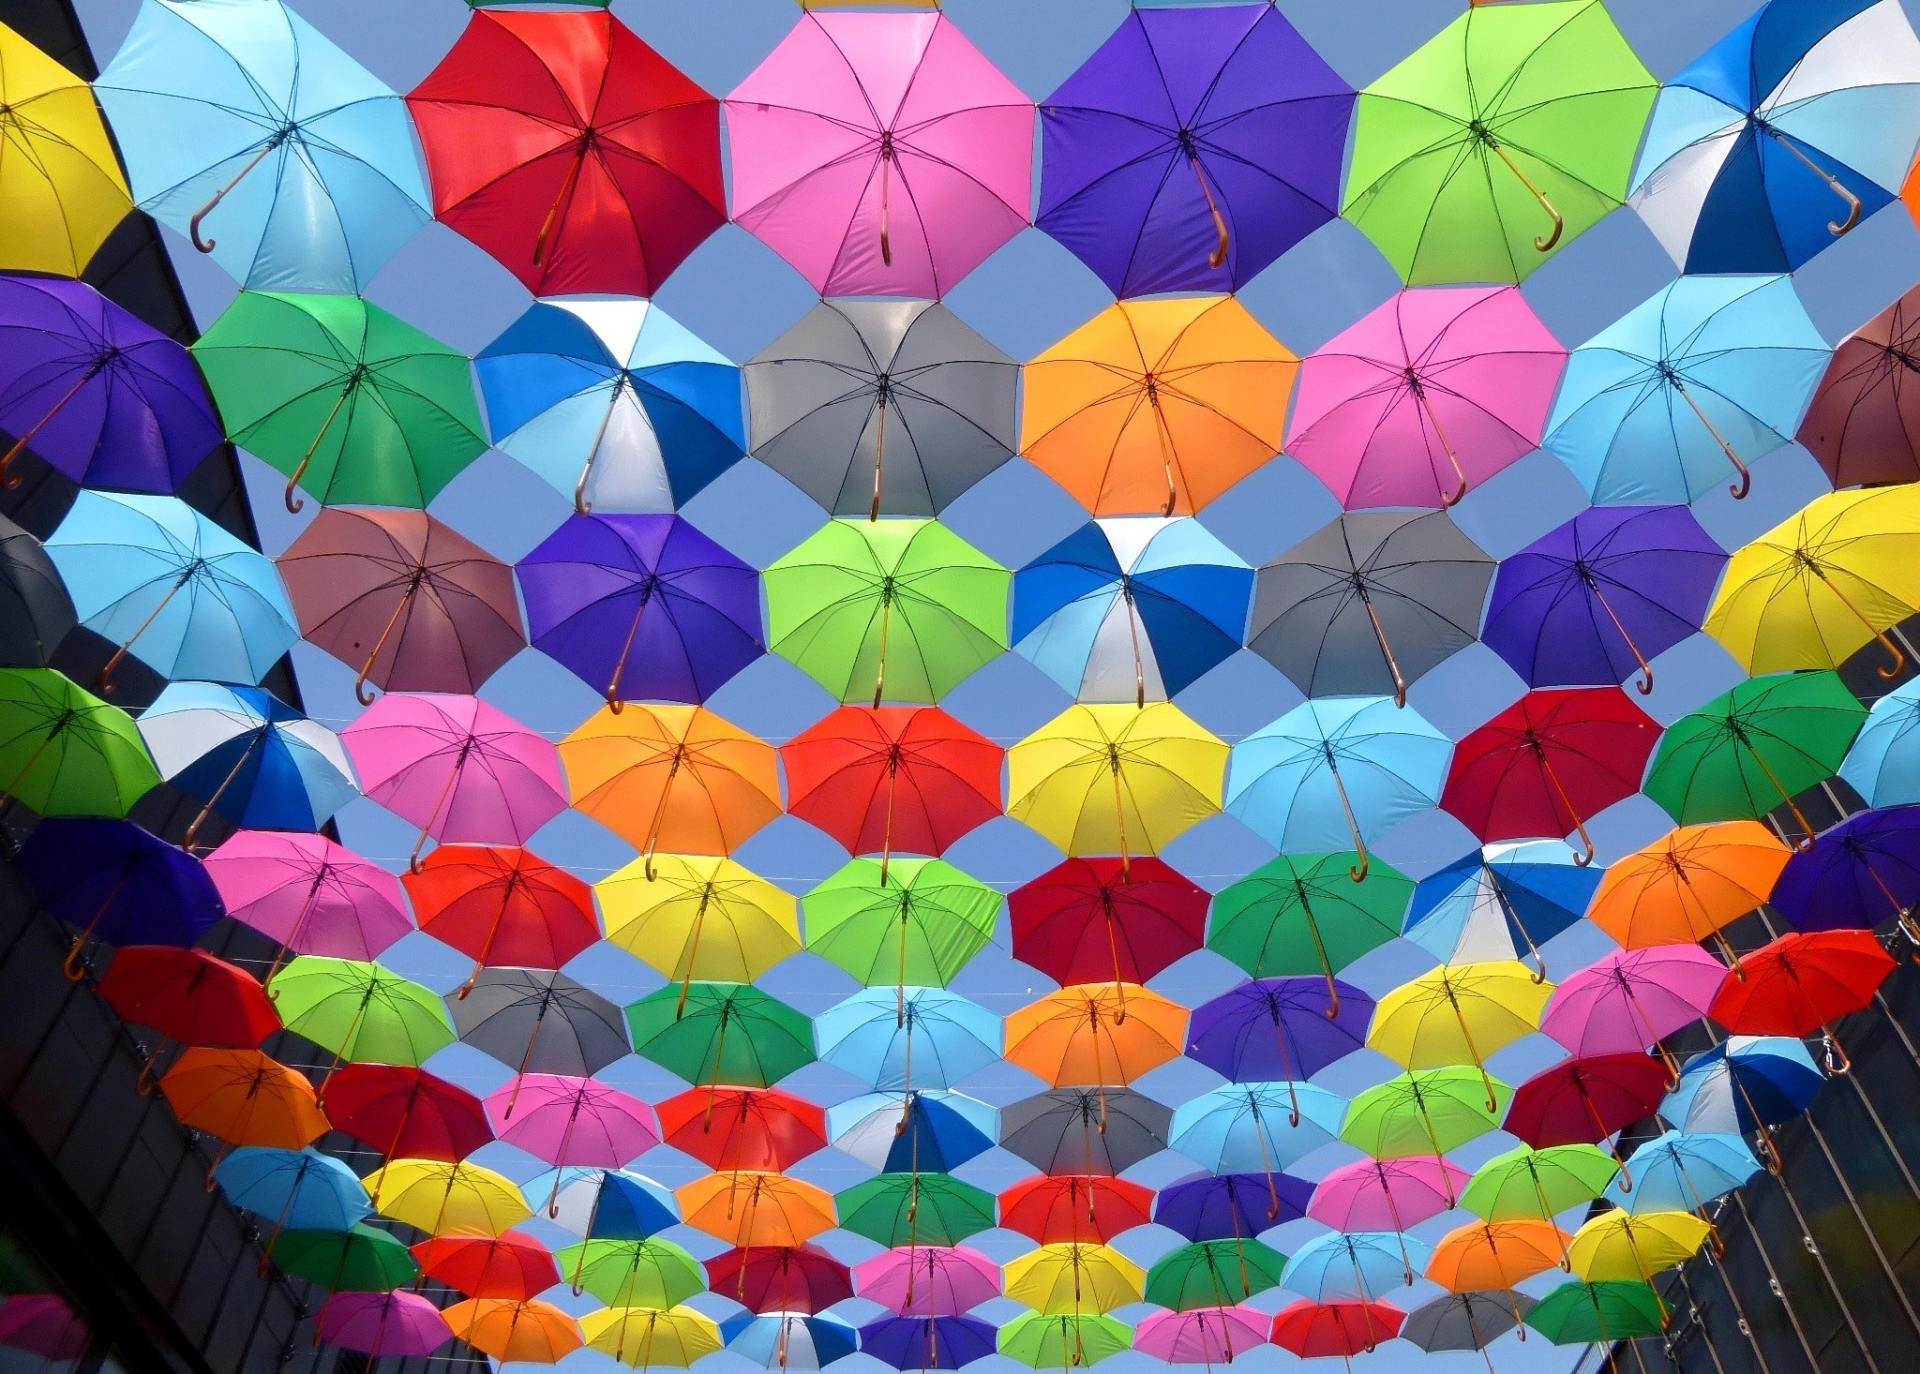 Low wide angle image of multi colored umbrellas grouped together